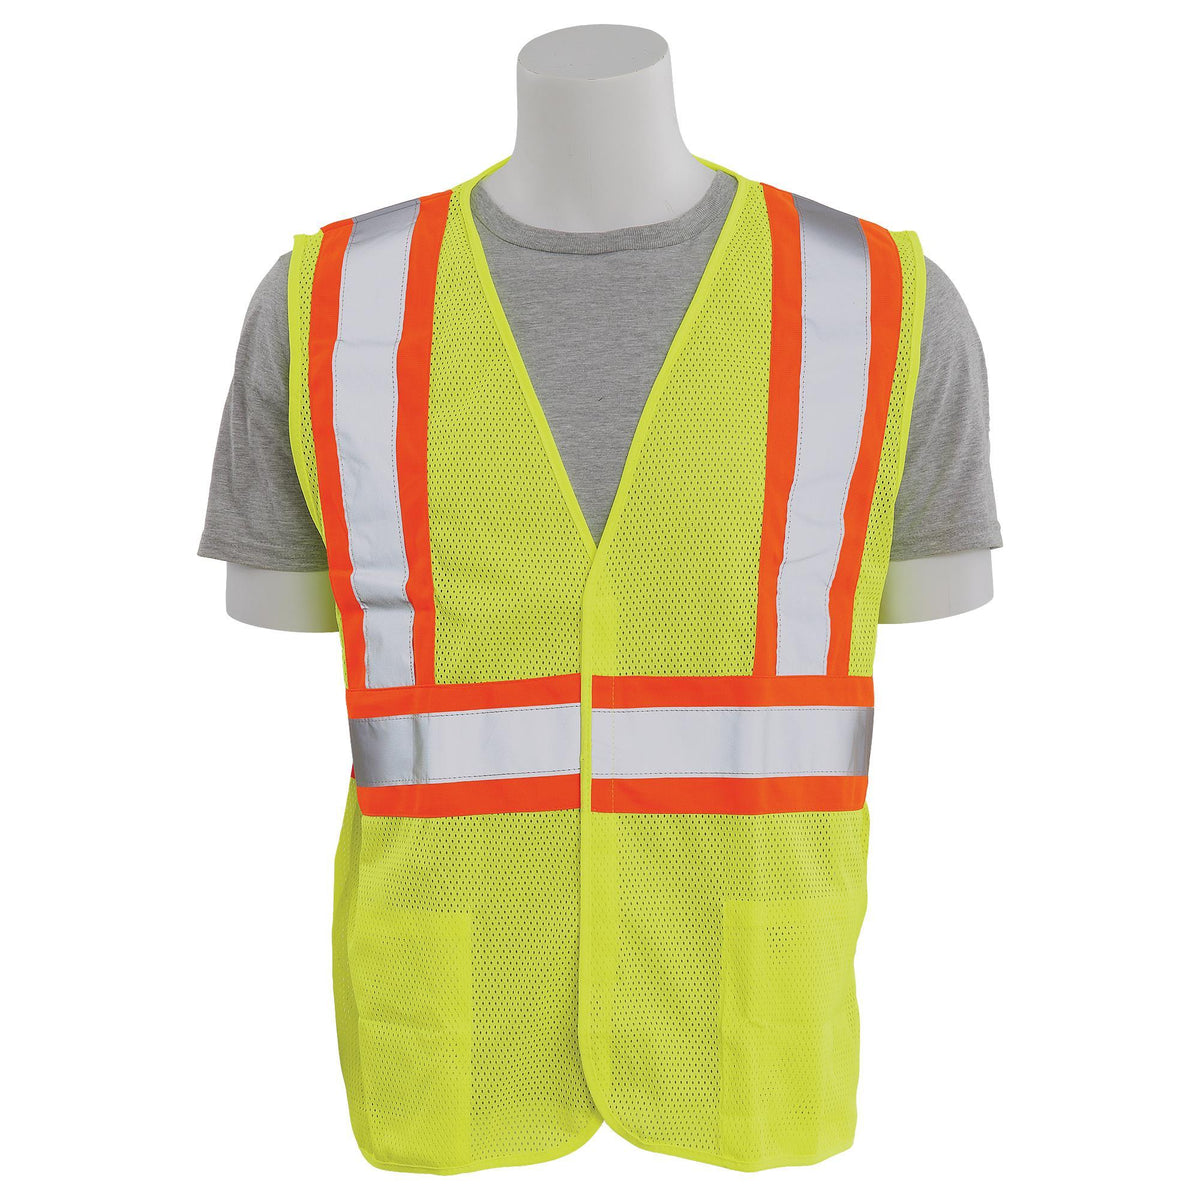 S382T Class 2 Mesh Safety Vest with Contrasting Tape - Tall